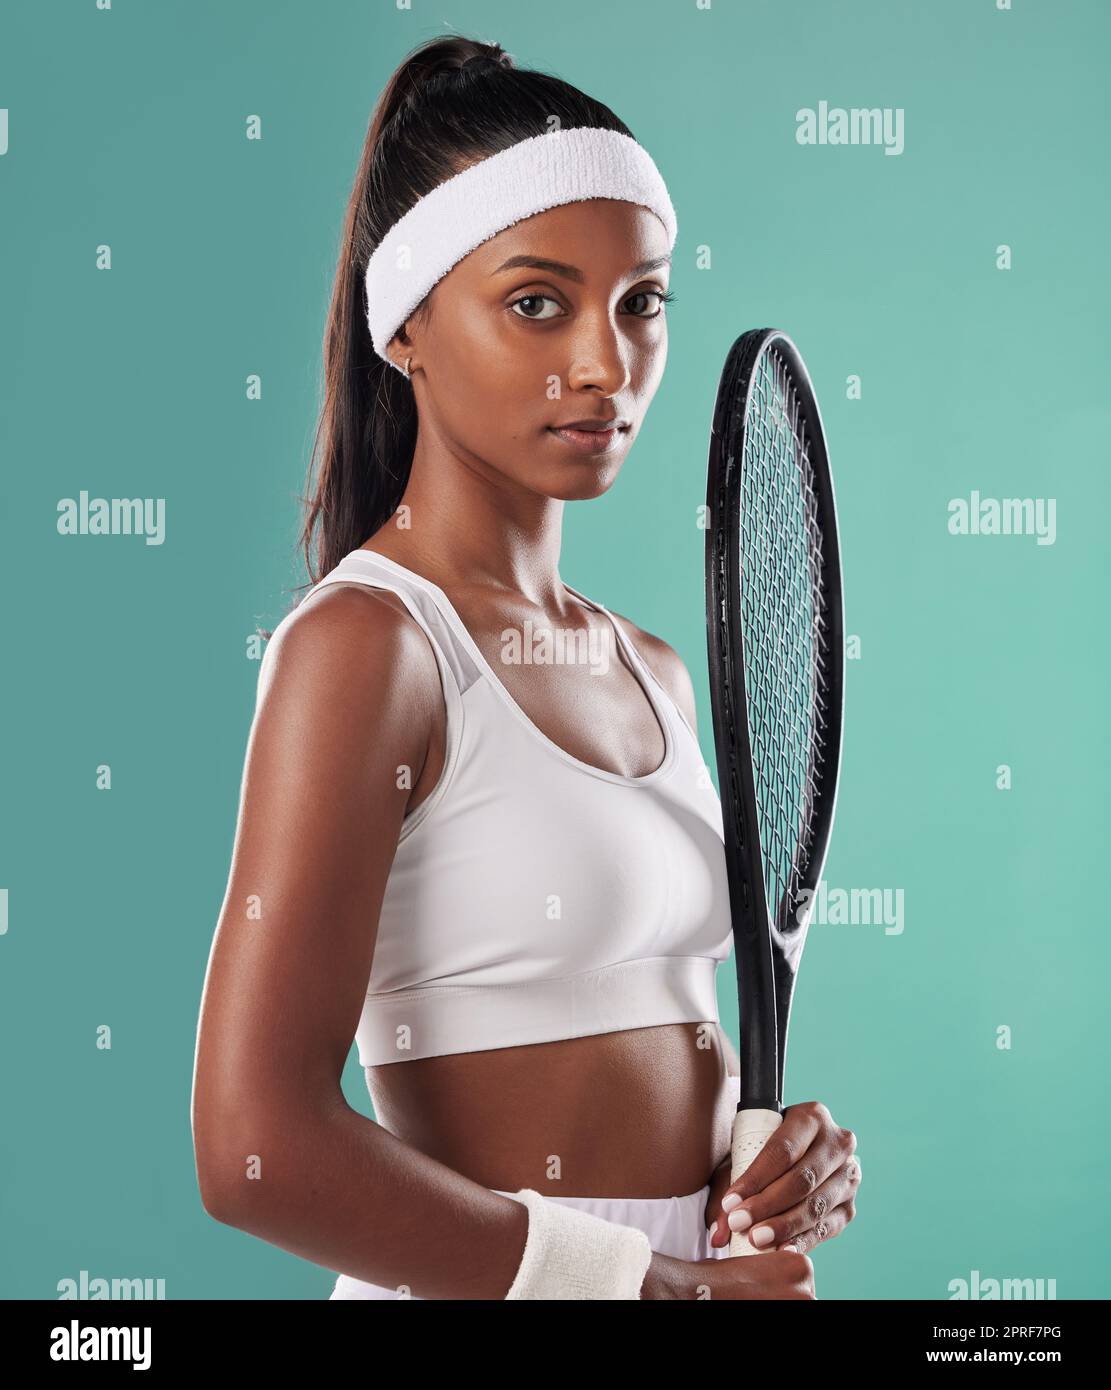 https://c8.alamy.com/comp/2PRF7PG/tennis-player-athlete-or-sports-person-training-for-game-or-match-fitness-confident-and-athletic-lady-posing-with-a-racket-for-competition-portrait-of-black-woman-female-exercise-and-workout-2PRF7PG.jpg